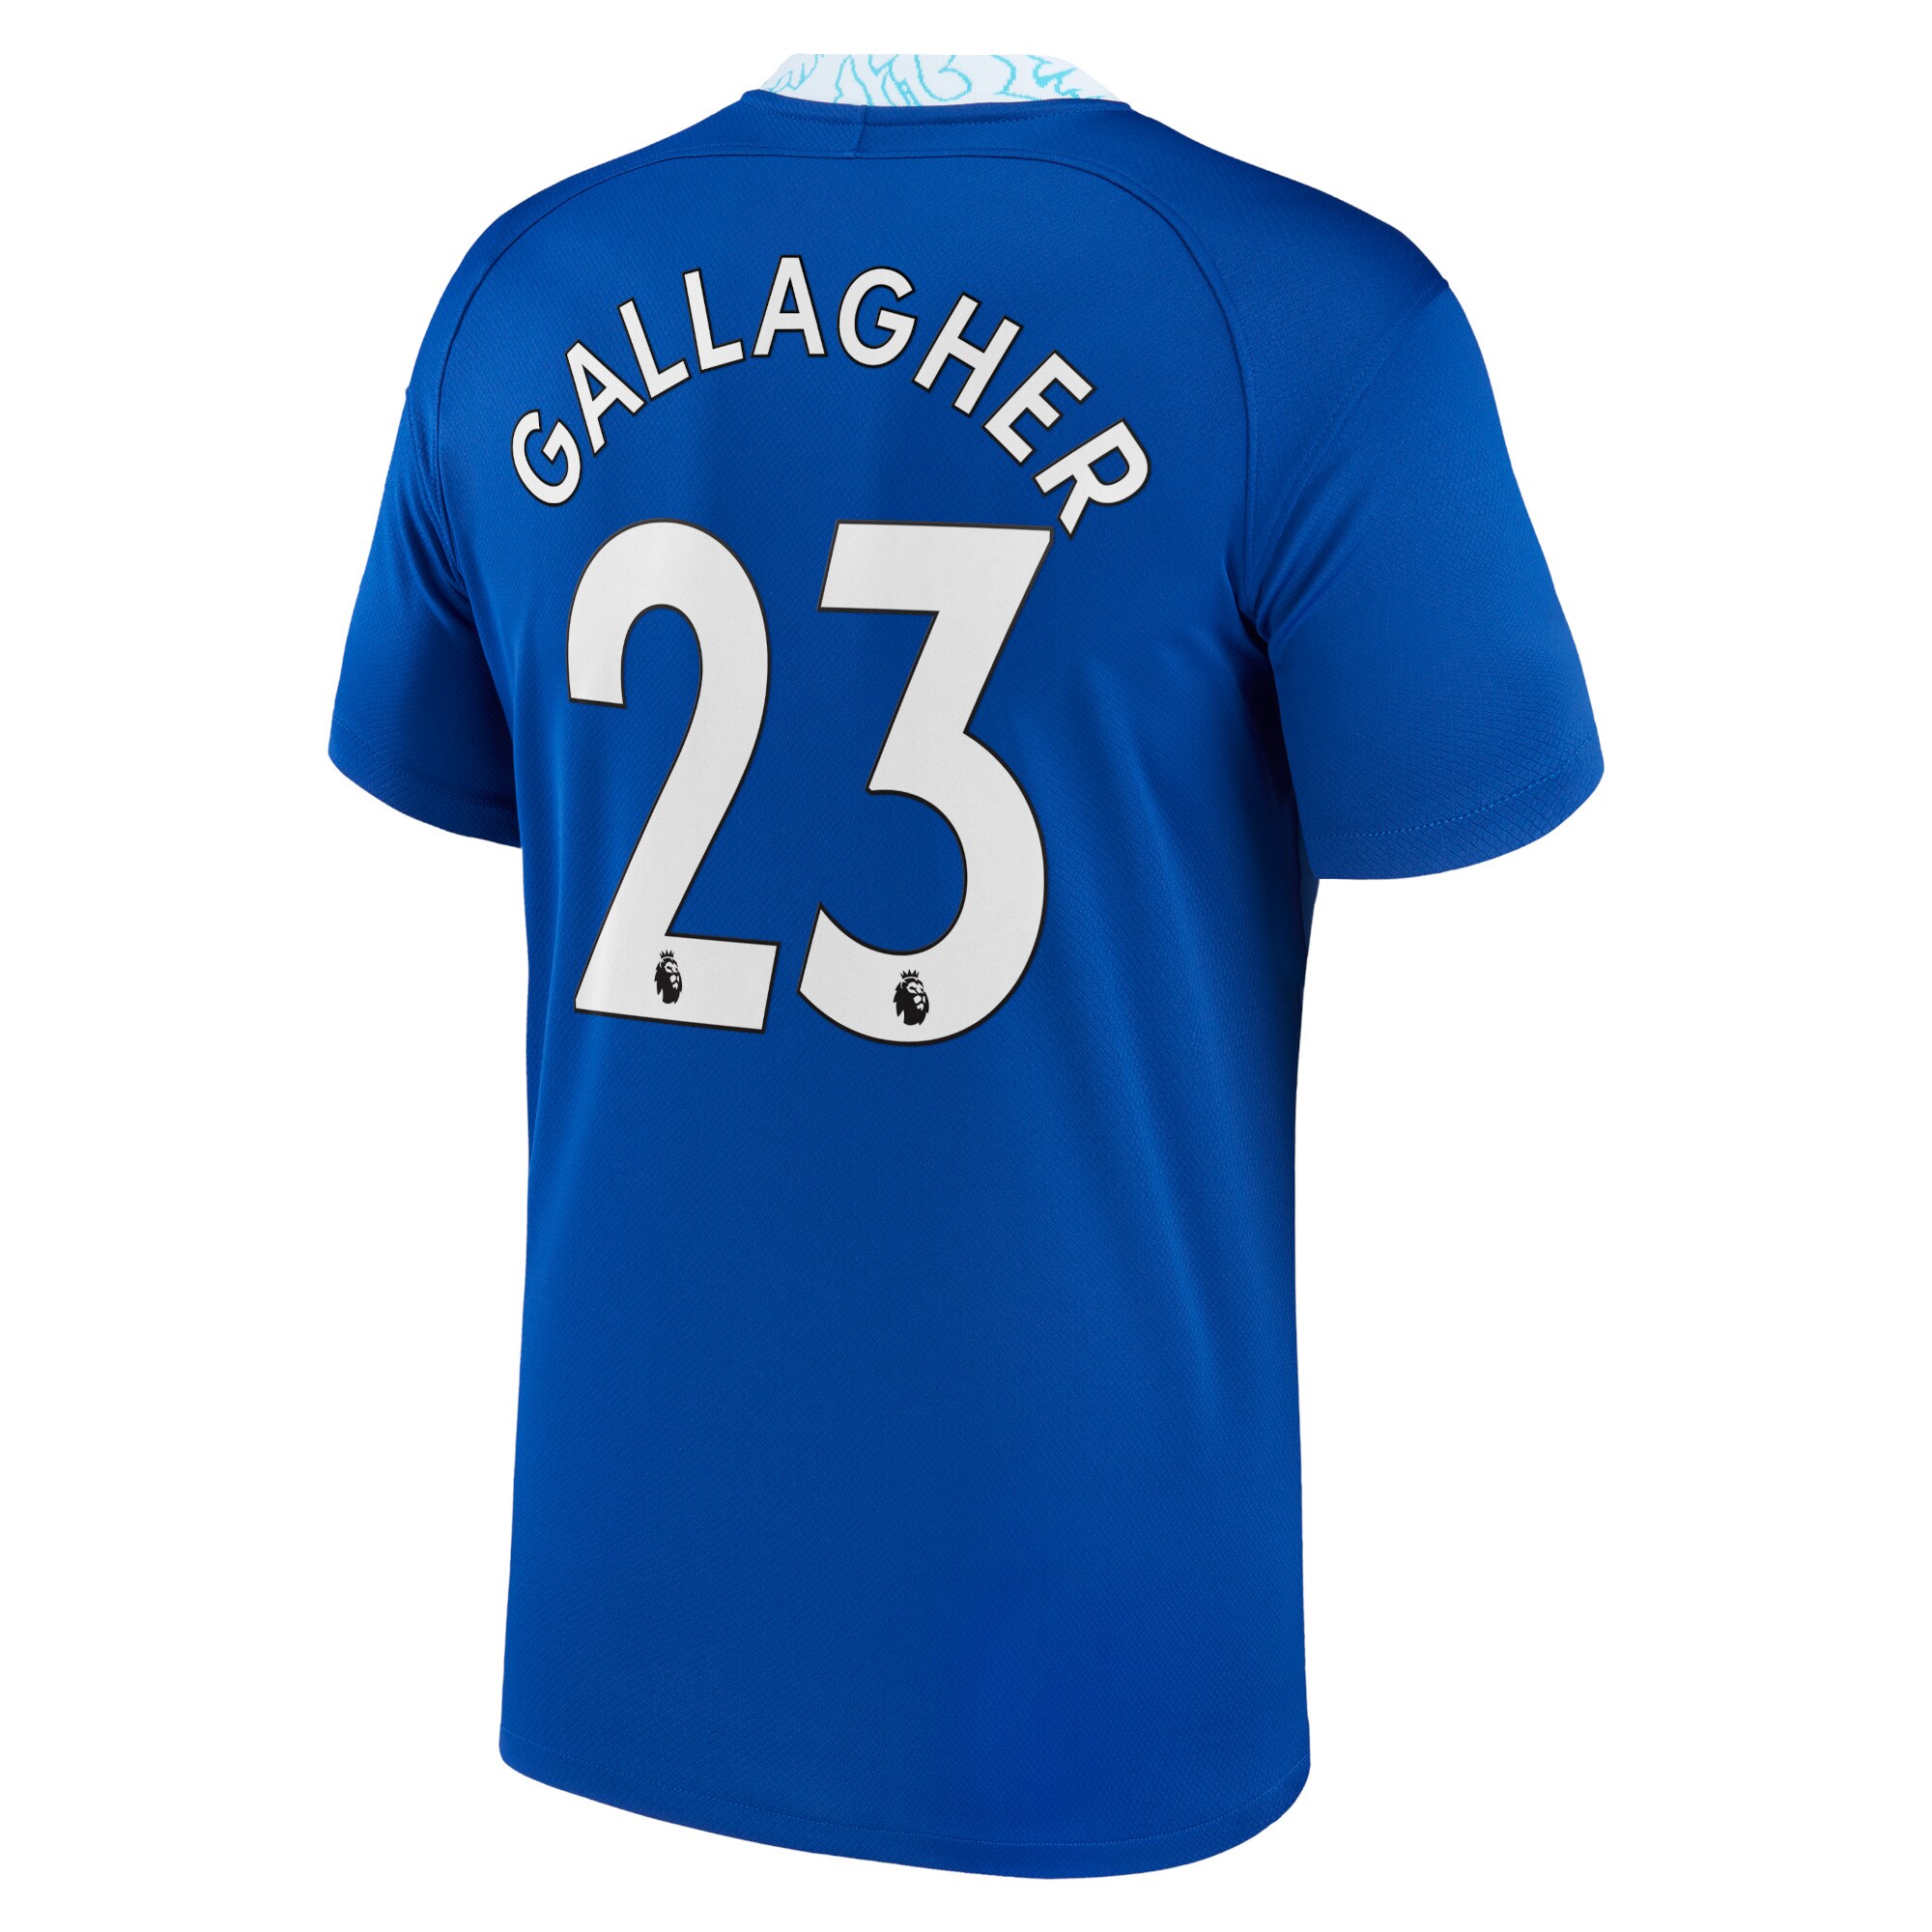 Chelsea Home Stadium Shirt 2022-23 with Gallagher 23 printing